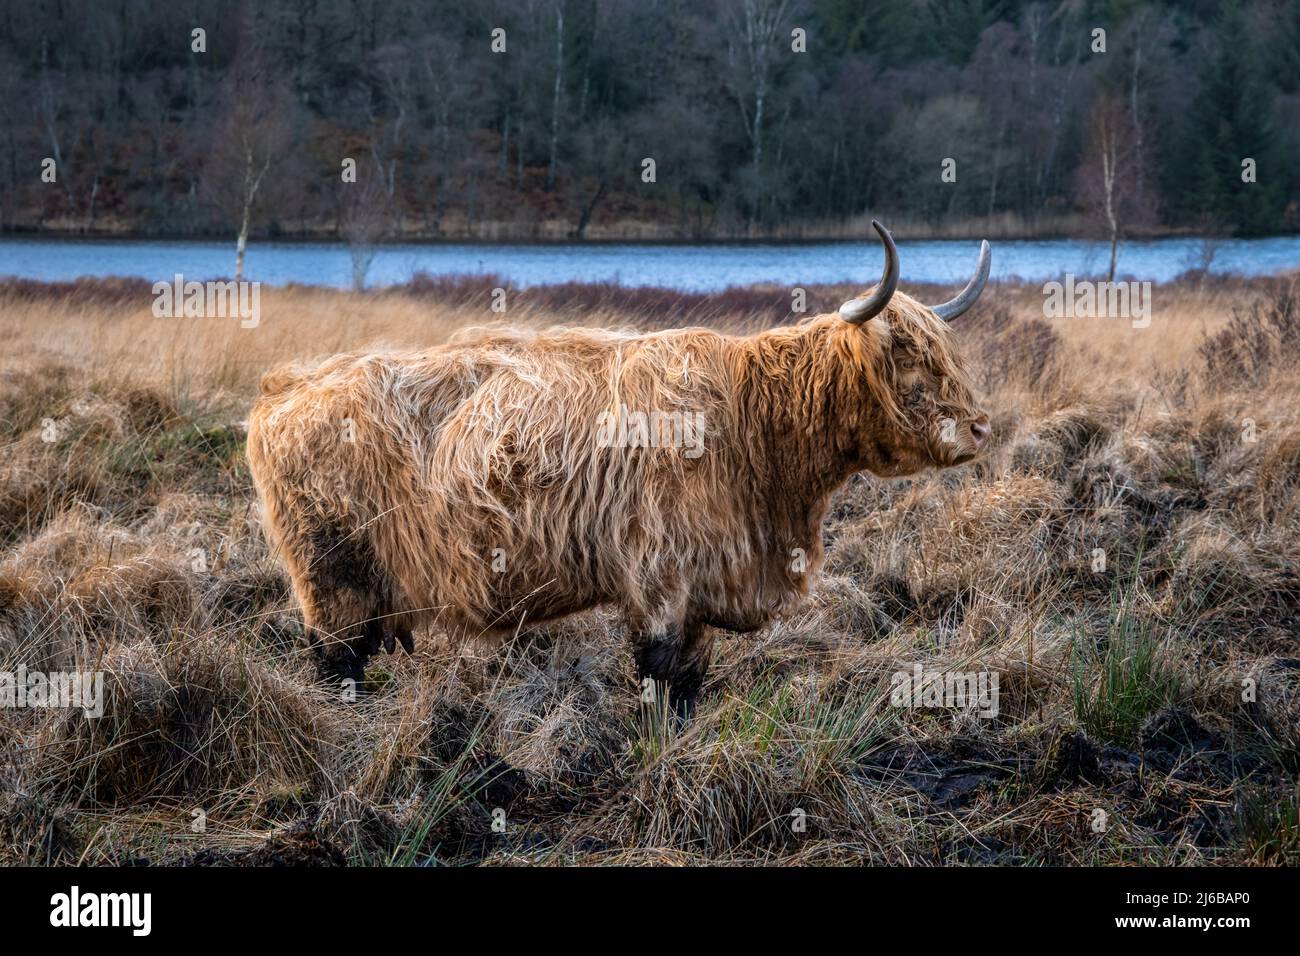 A highland cow with horns standing in a Scottish field in winter Stock Photo